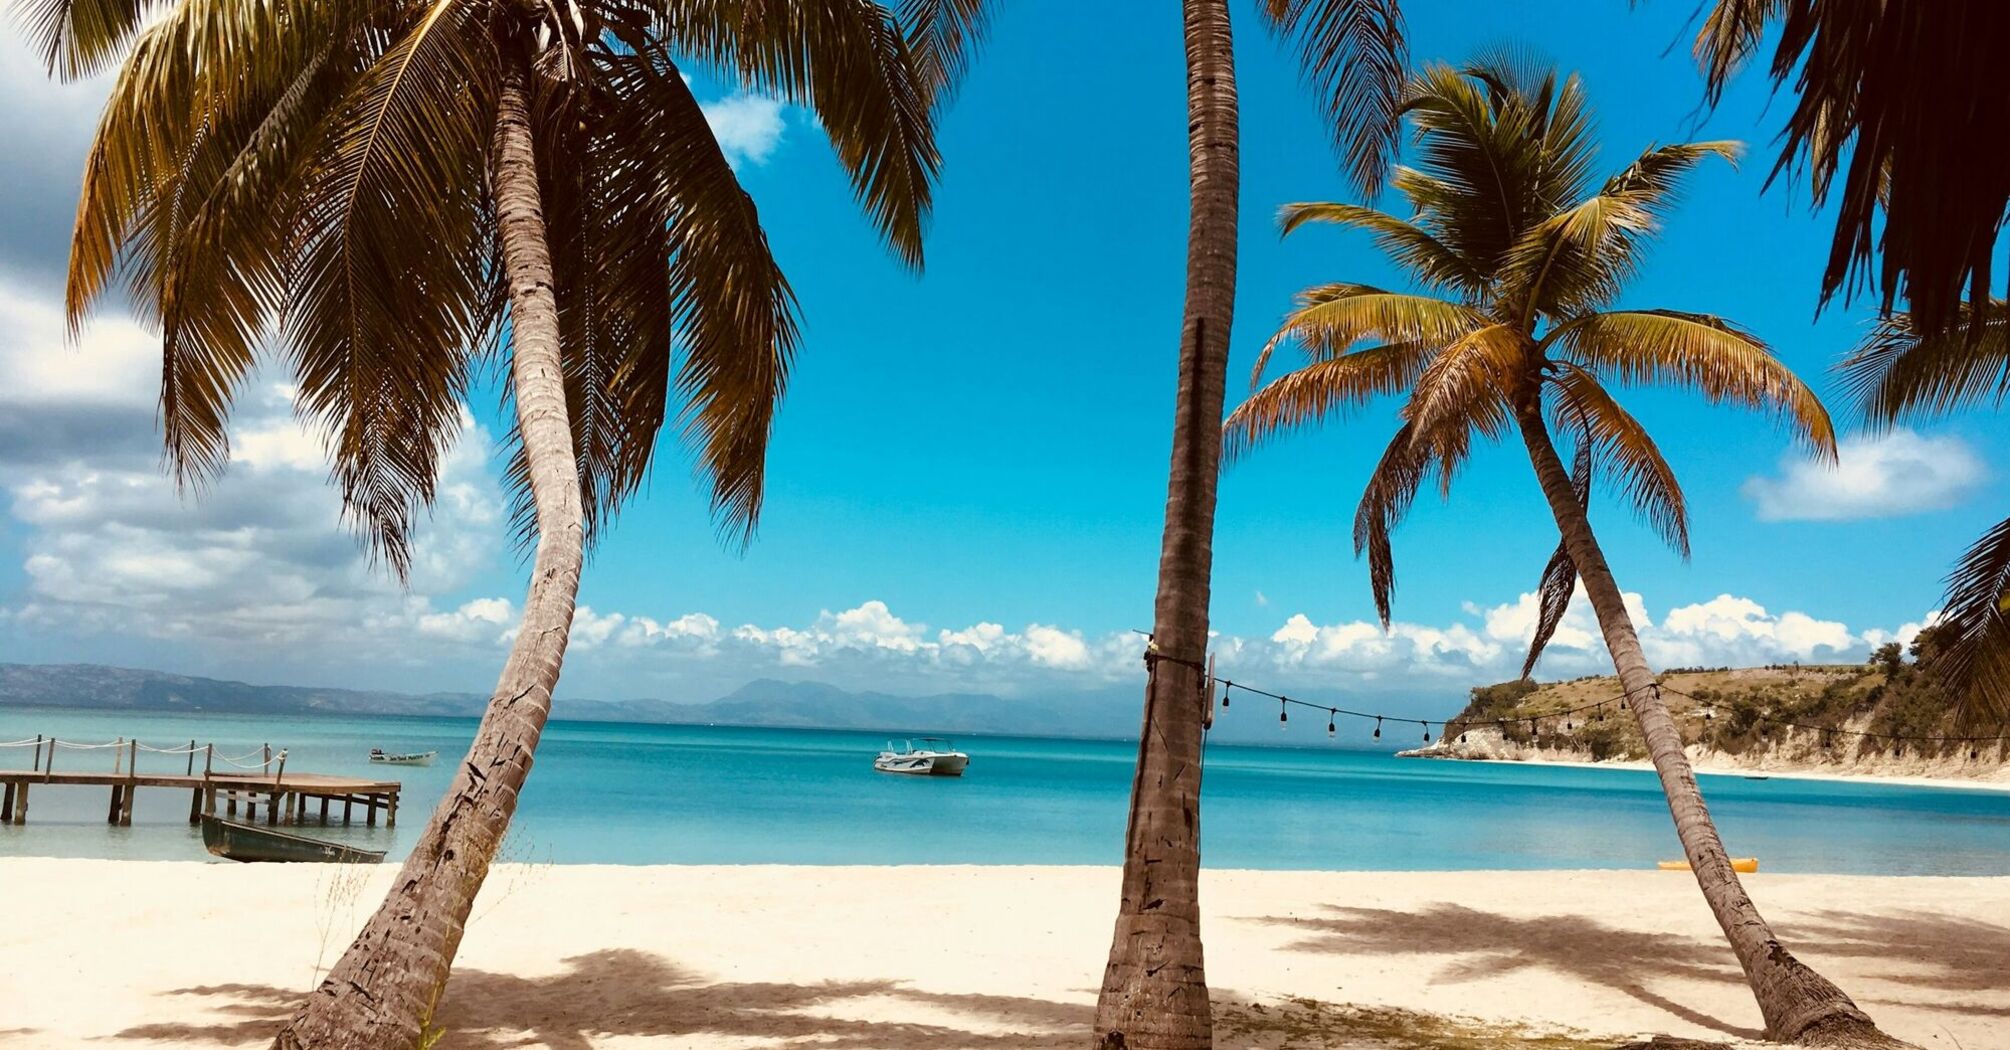 Tropical beach view with clear blue sky, palm trees on the sandy shore, a calm sea, and a small boat near a wooden pier in the distance